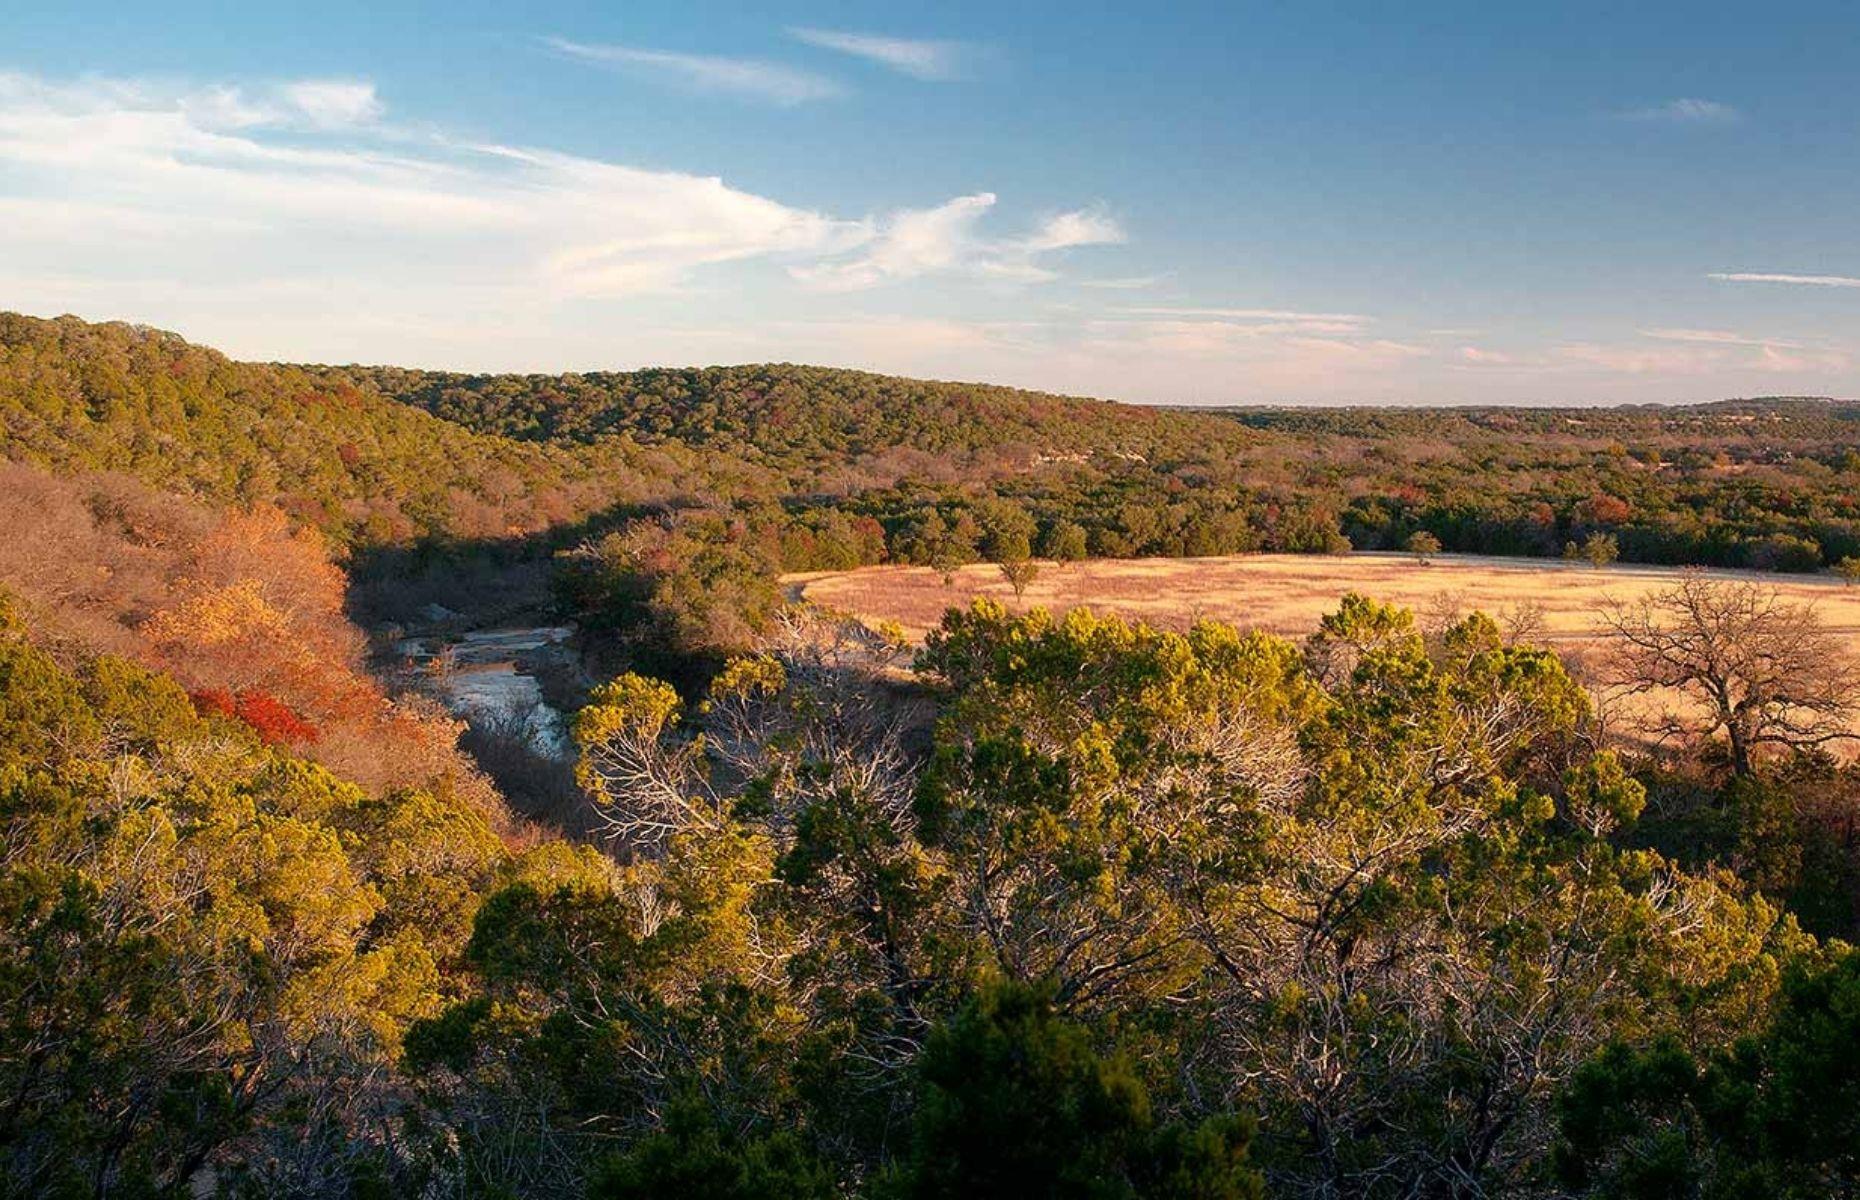 <p>Glen Rose is often referred to as the Dinosaur Capital of Texas and for good reason. Millions of years ago, sauropods and theropods left footprints in the bed of the Paluxy River and these incredible tracks can still be seen to this day. One of the best ways to see them is to rent a kayak from <a href="https://tpwd.texas.gov/state-parks/dinosaur-valley">Dinosaur Valley State Park</a> and take a scenic journey down this ancient river. Guided horseback tours are also available with the <a href="https://www.eercc.com/">Eagle Eye Ranch Carriage Company</a>.</p>  <p><a href="https://www.loveexploring.com/galleries/86372/the-most-beautiful-state-park-in-every-us-state?page=1"><strong>Discover the most beautiful state park in every US state</strong></a></p>